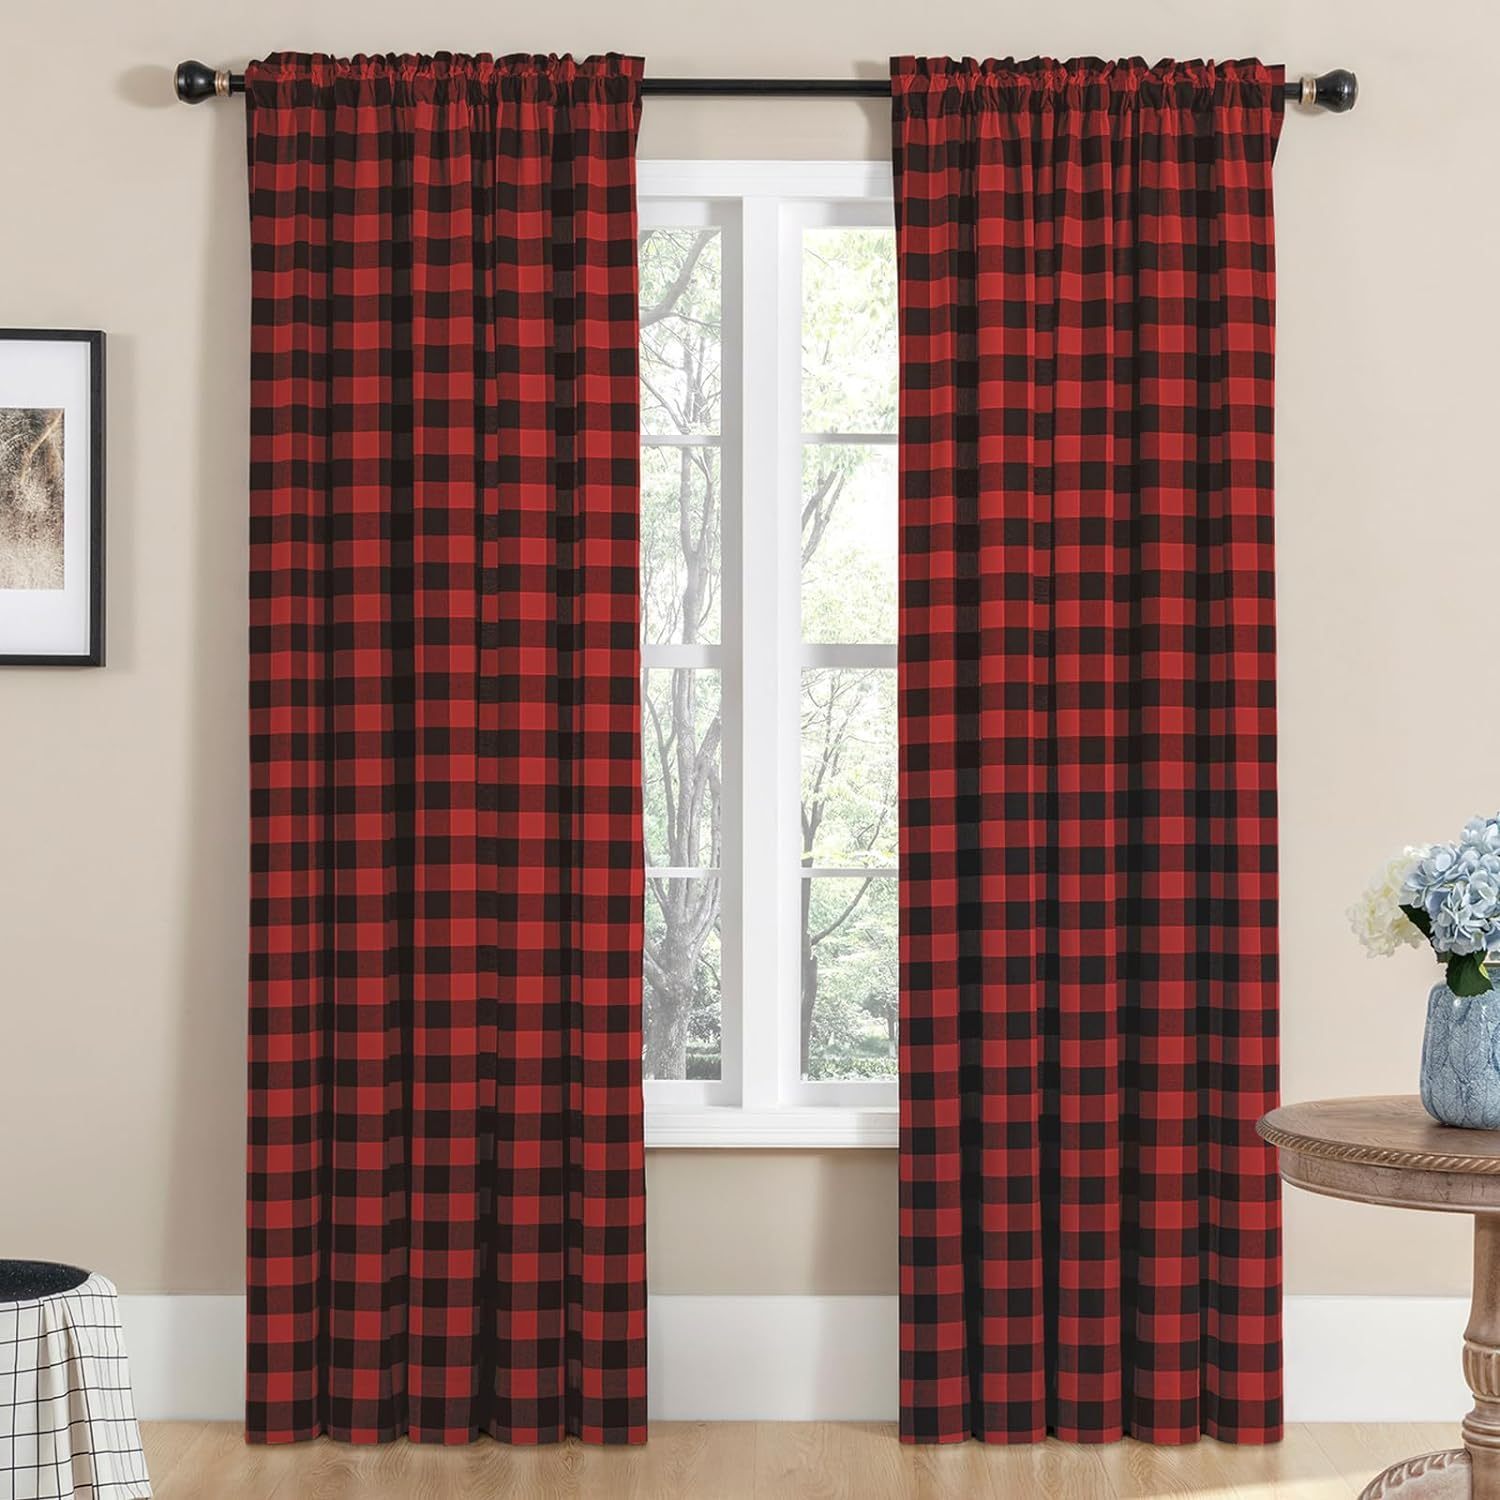 

2pcs Black Red Buffalo Check Plaid Curtains For Living Room, Farmhouse Gingham Style Cotton Texture Rod Pocket Bedroom Semi Curtain Drapes